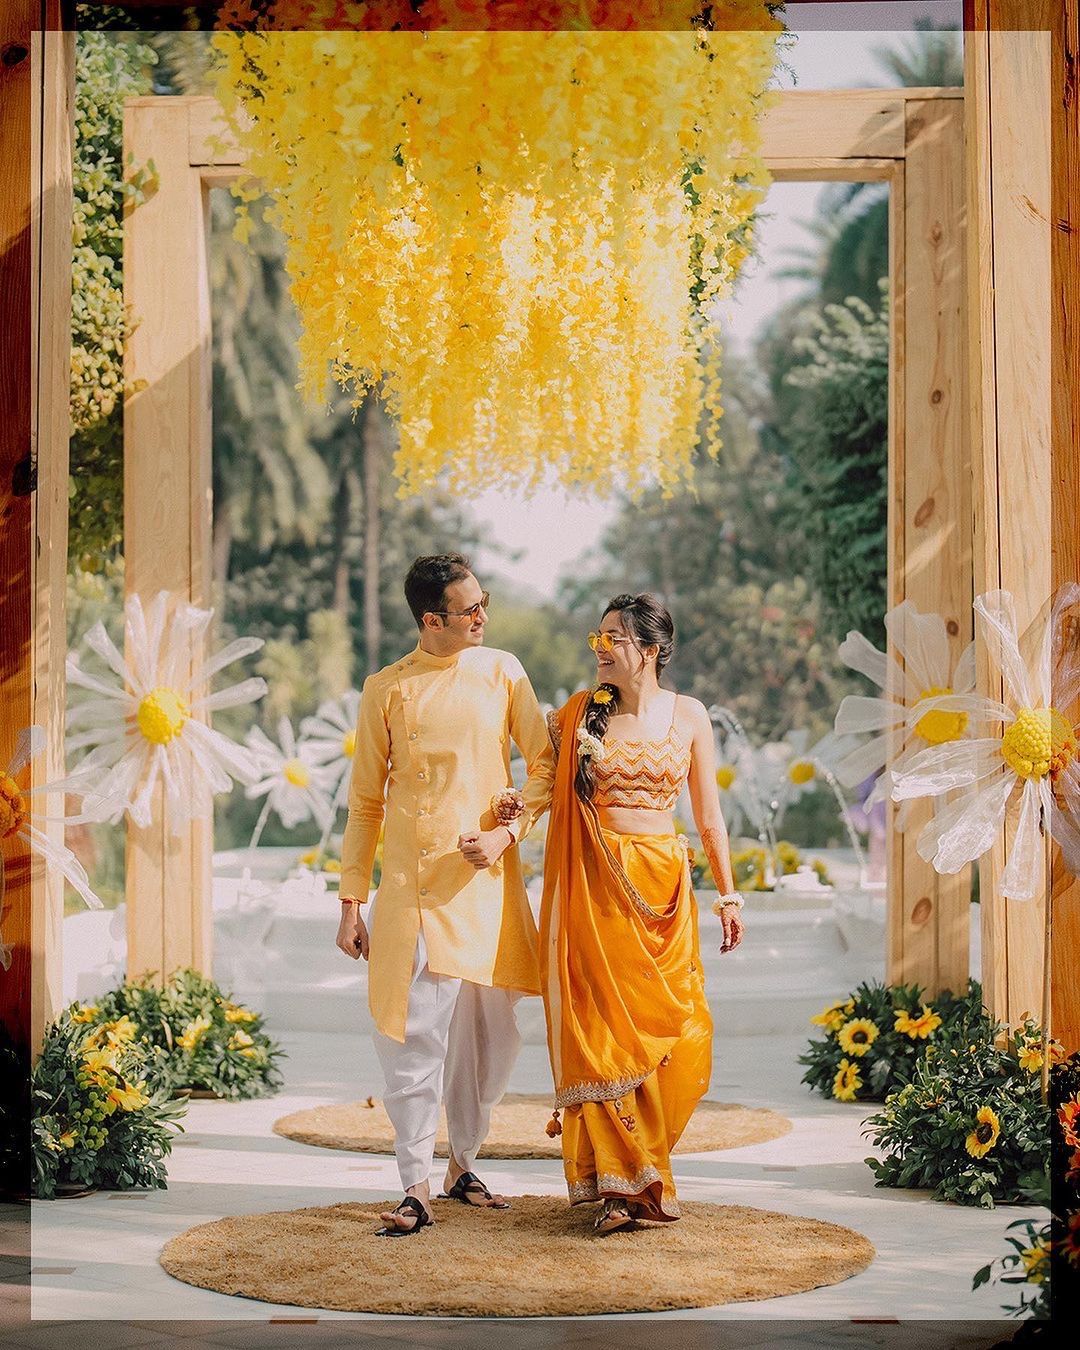 Candid photo of a couple on their Haldi